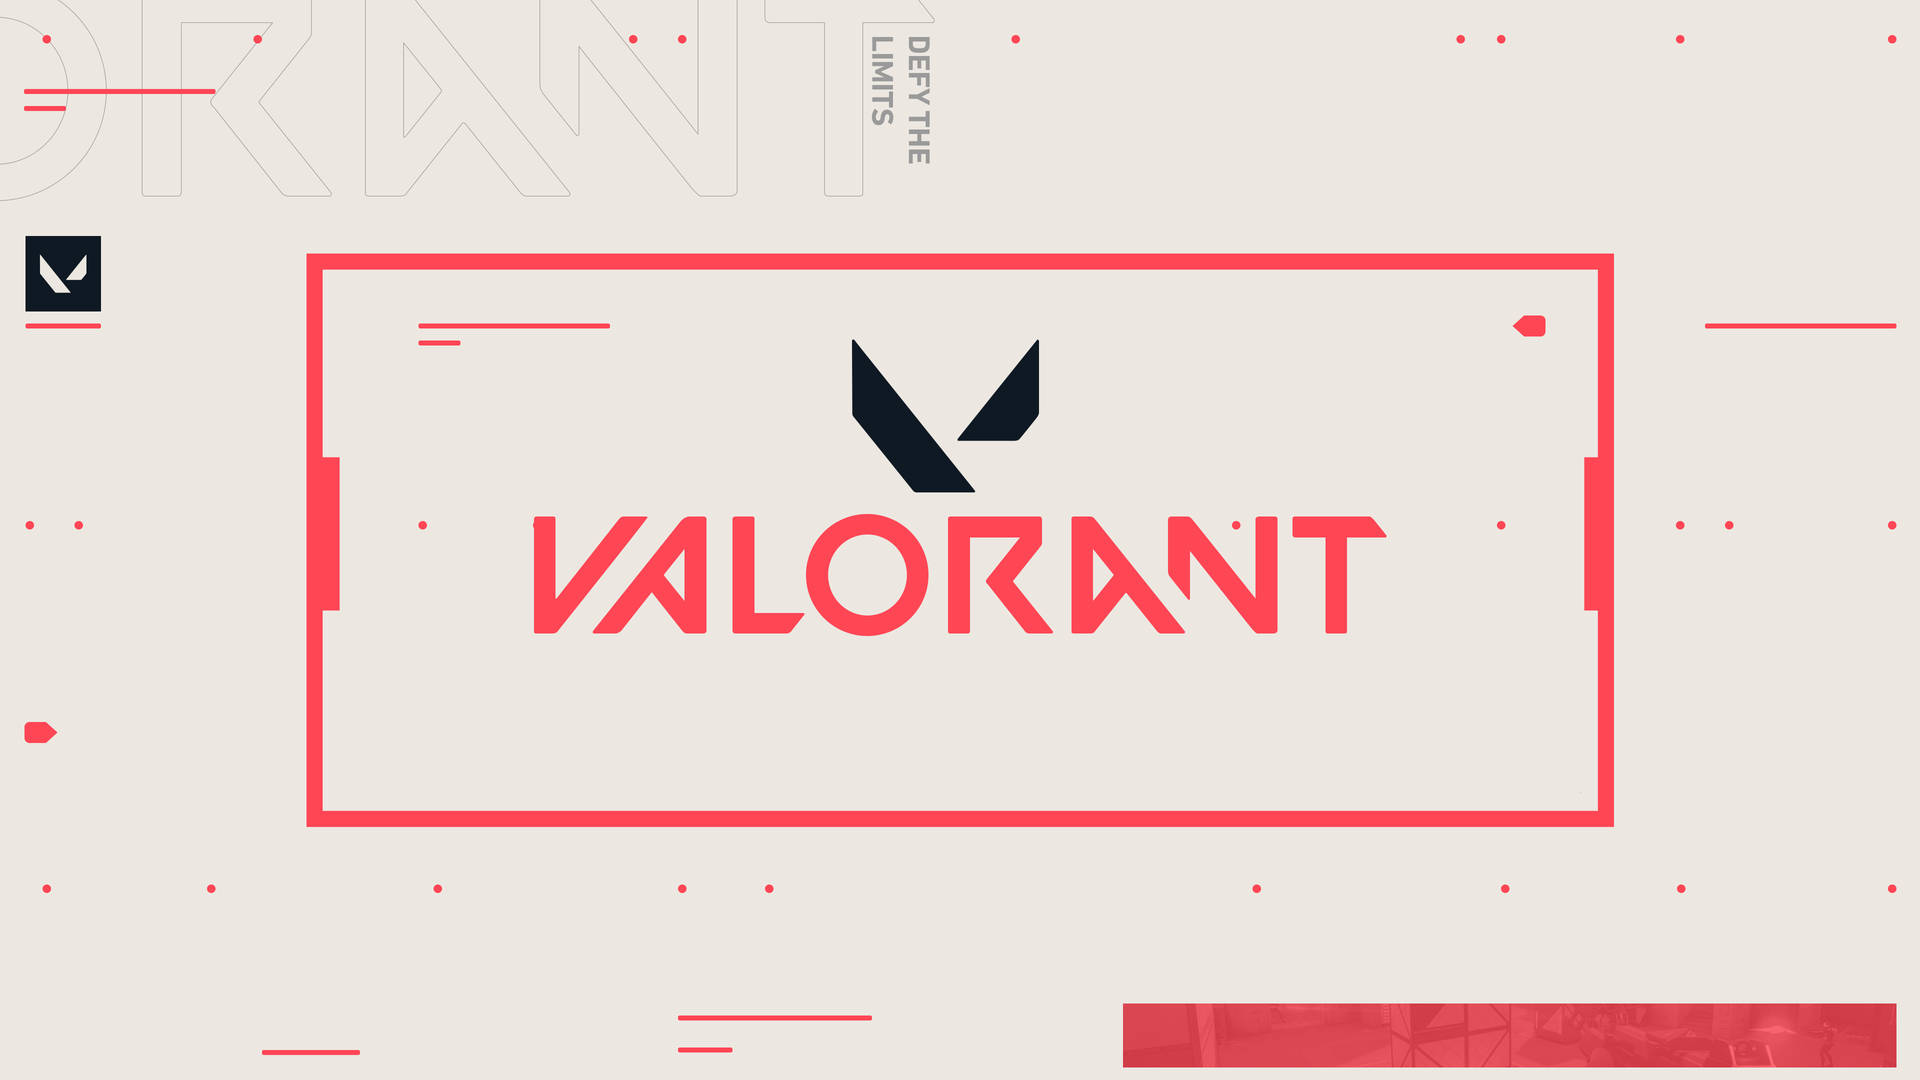 White And Red Valorant Logo Wallpaper